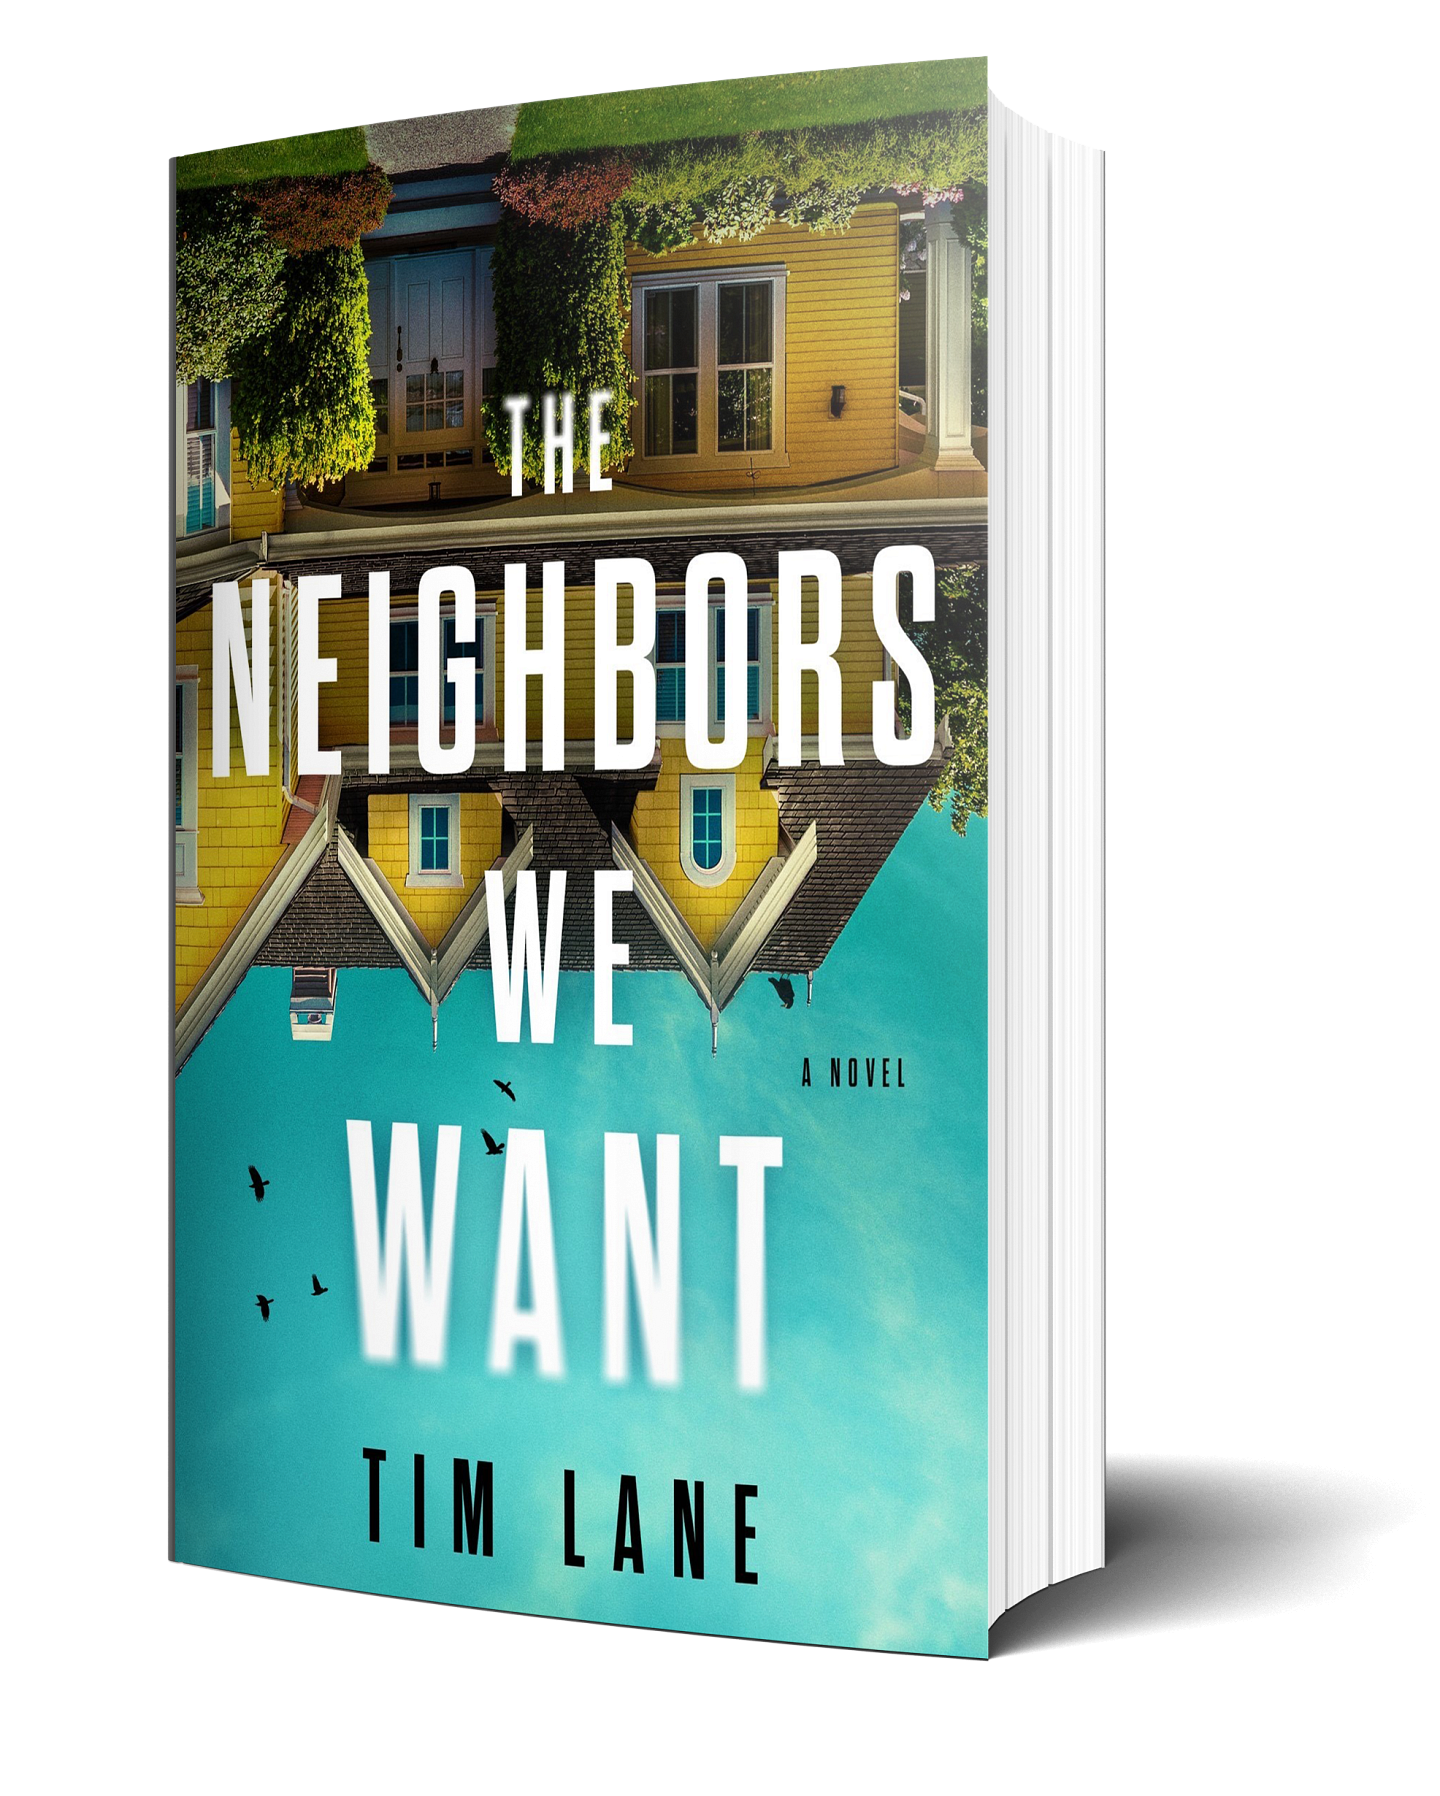 The Neighbors We Want by Timothy S. Lane